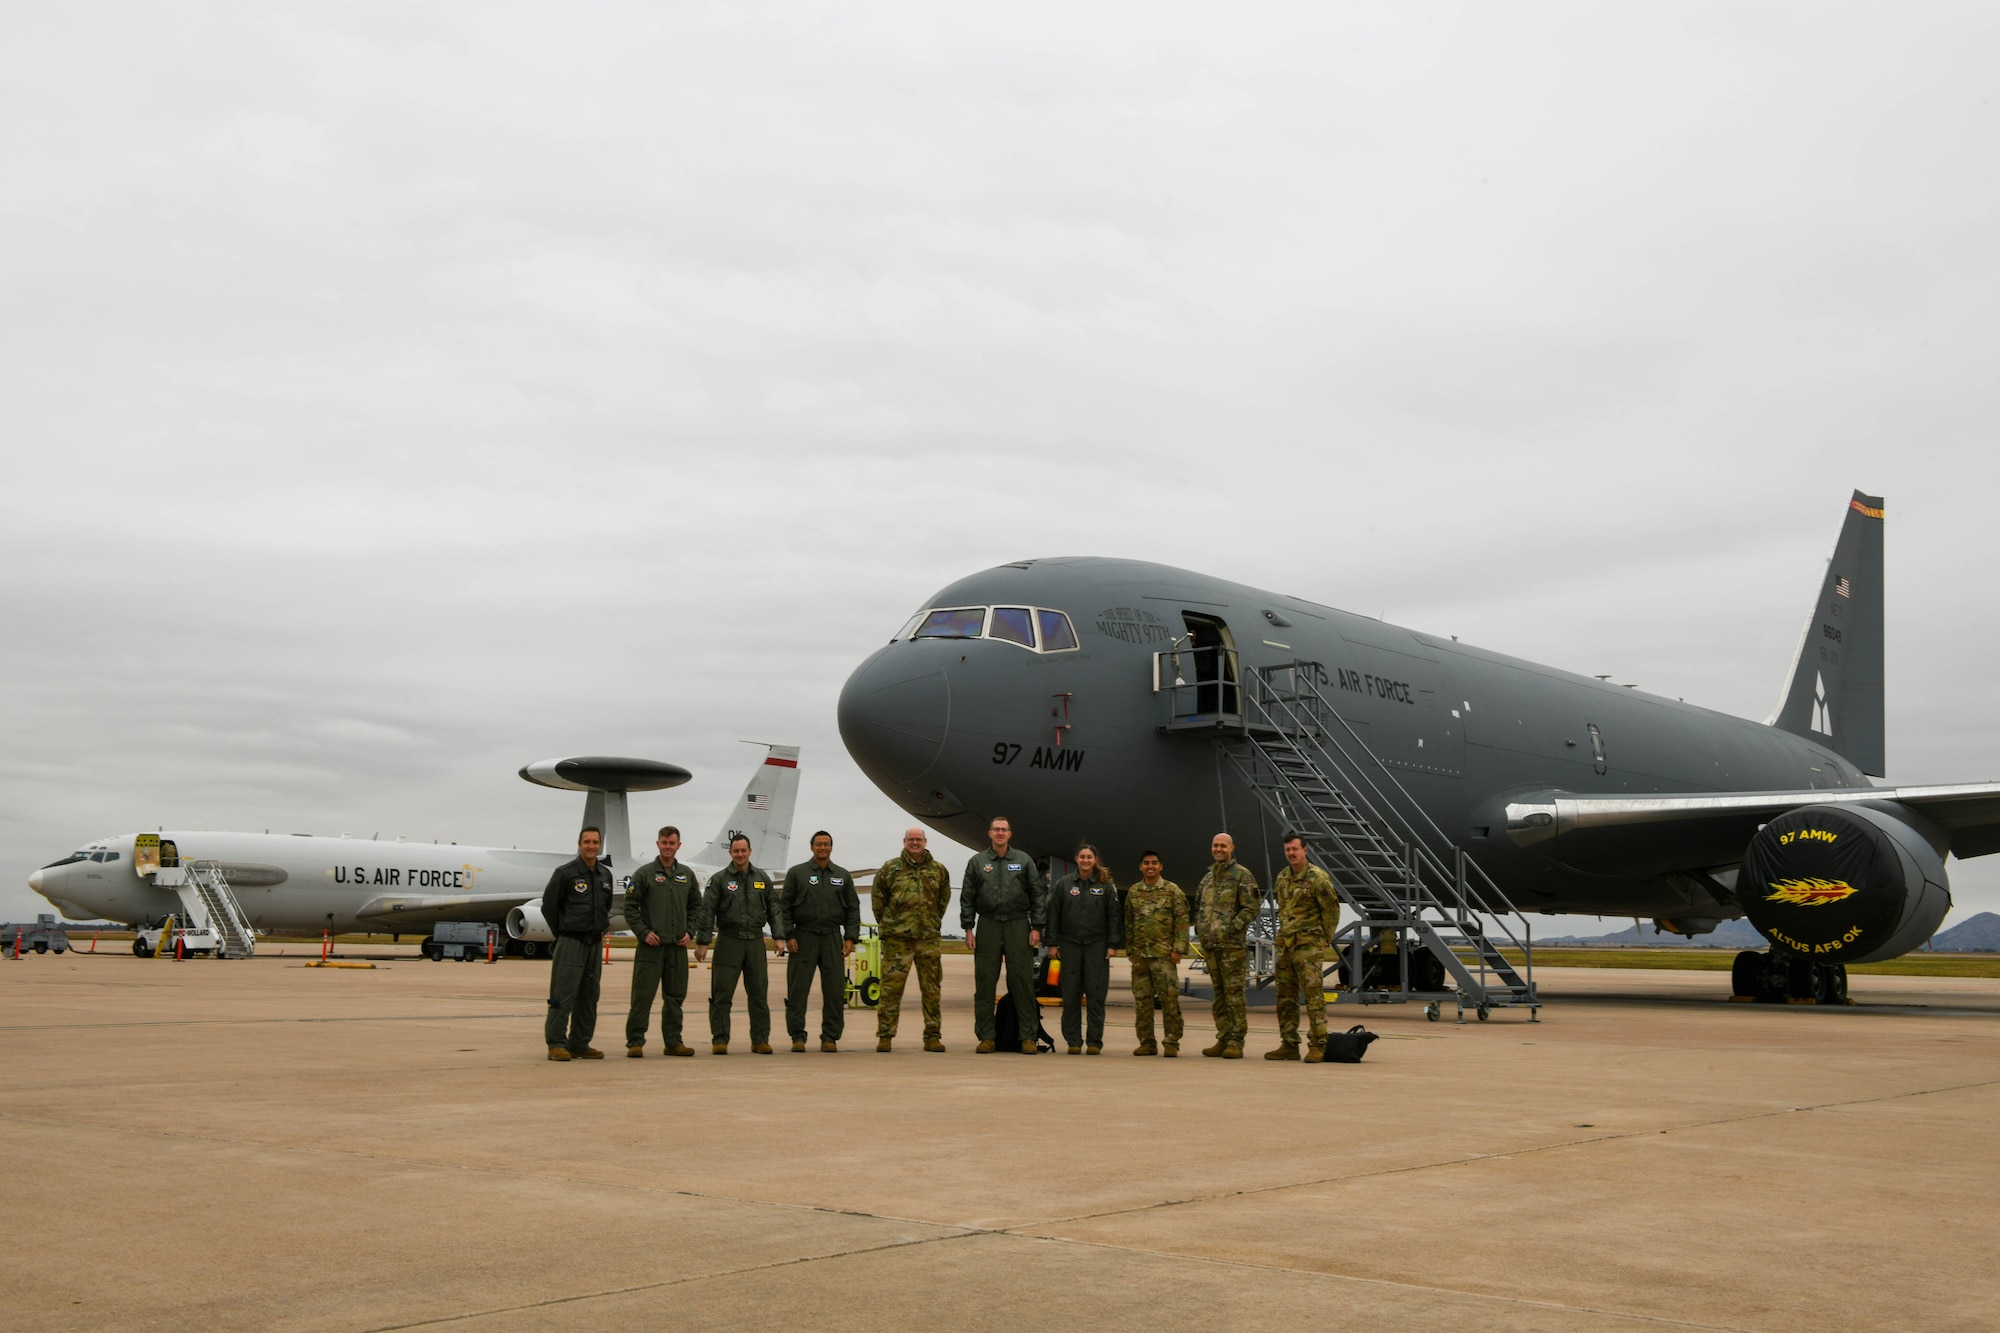 Members of the 56th Air Refueling Squadron (ARS) and the 552nd Operations Group (OG) pose for a photo on the flightline at Altus Air Force Force Base, Oklahoma, Nov. 2, 2021. The 552nd OG, from Tinker Air Force Base, Oklahoma, visited the 56th ARS to further educate them on the computer systems used on the KC-46 Pegasus. (U.S. Air Force photo by Airman 1st Class Trenton Jancze)